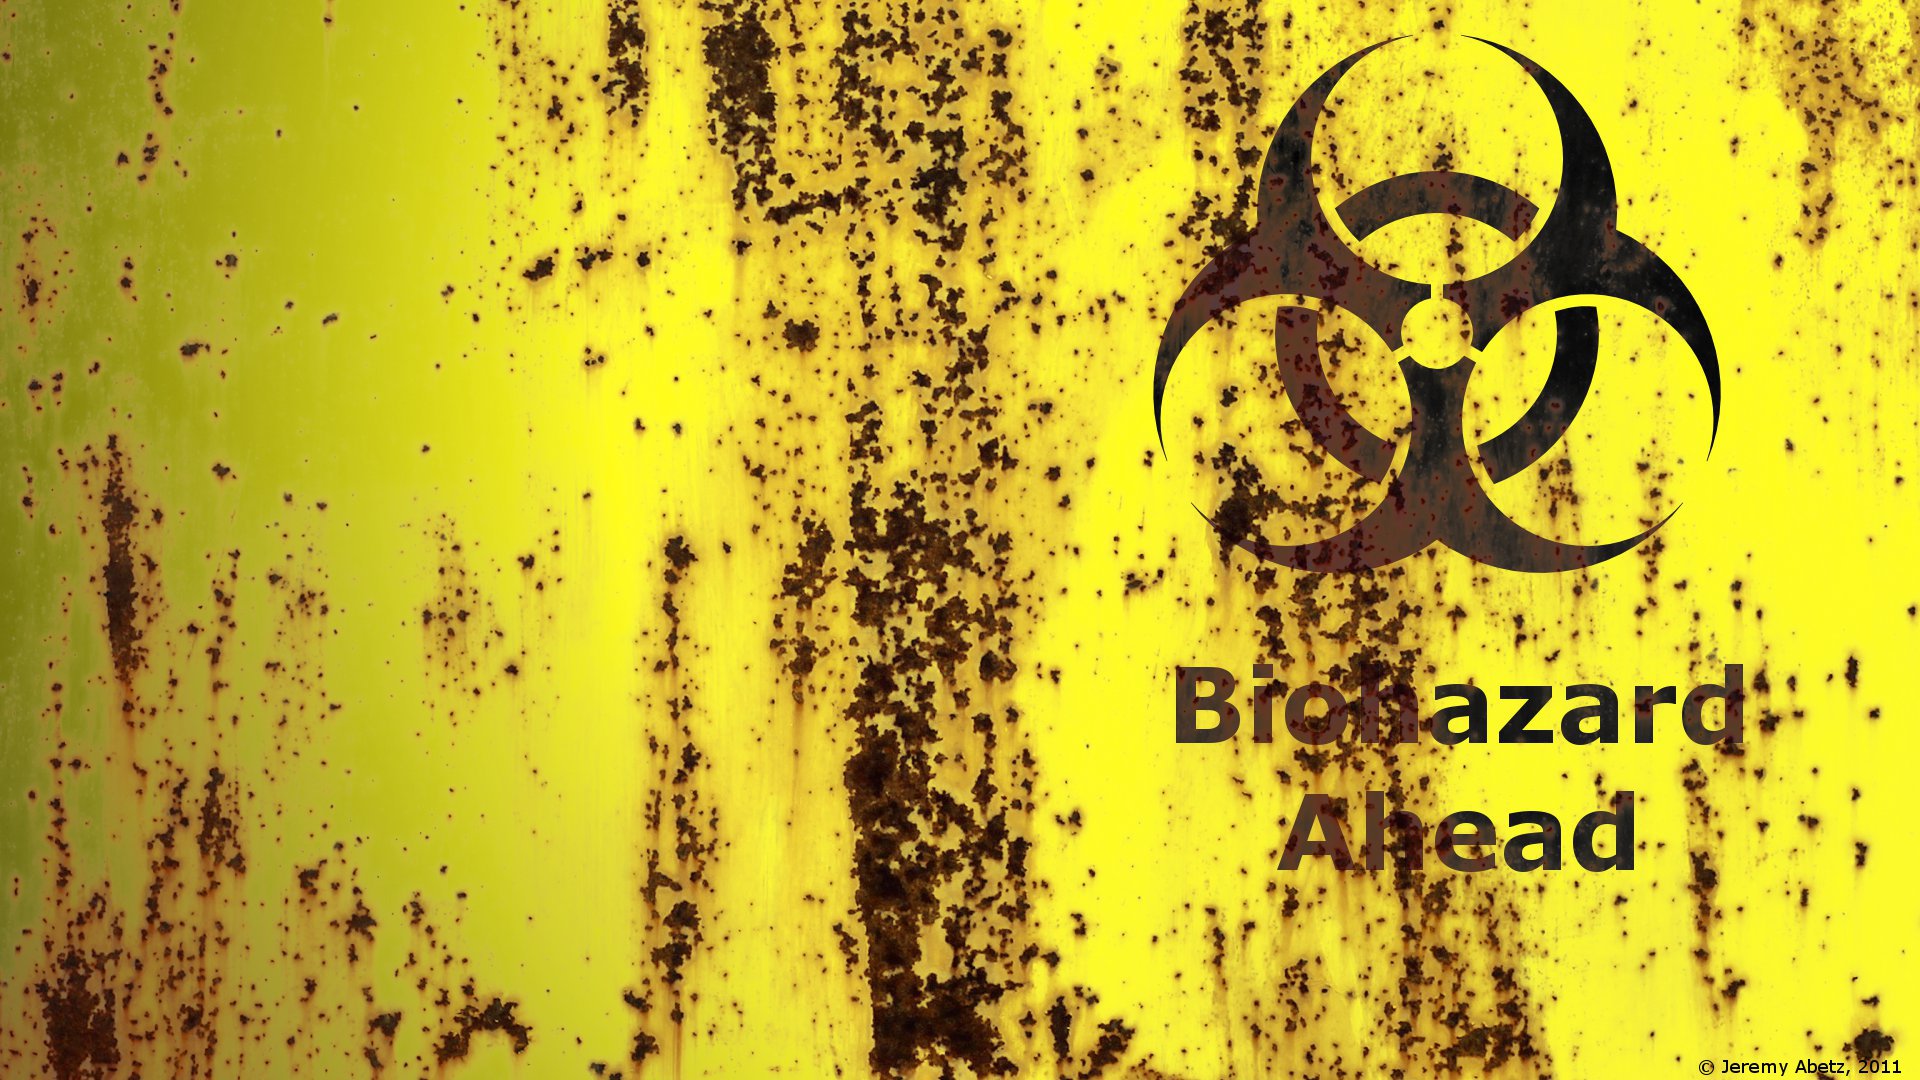 US Violating the Biological Weapons Convention, NGO Asserts1920 x 1080